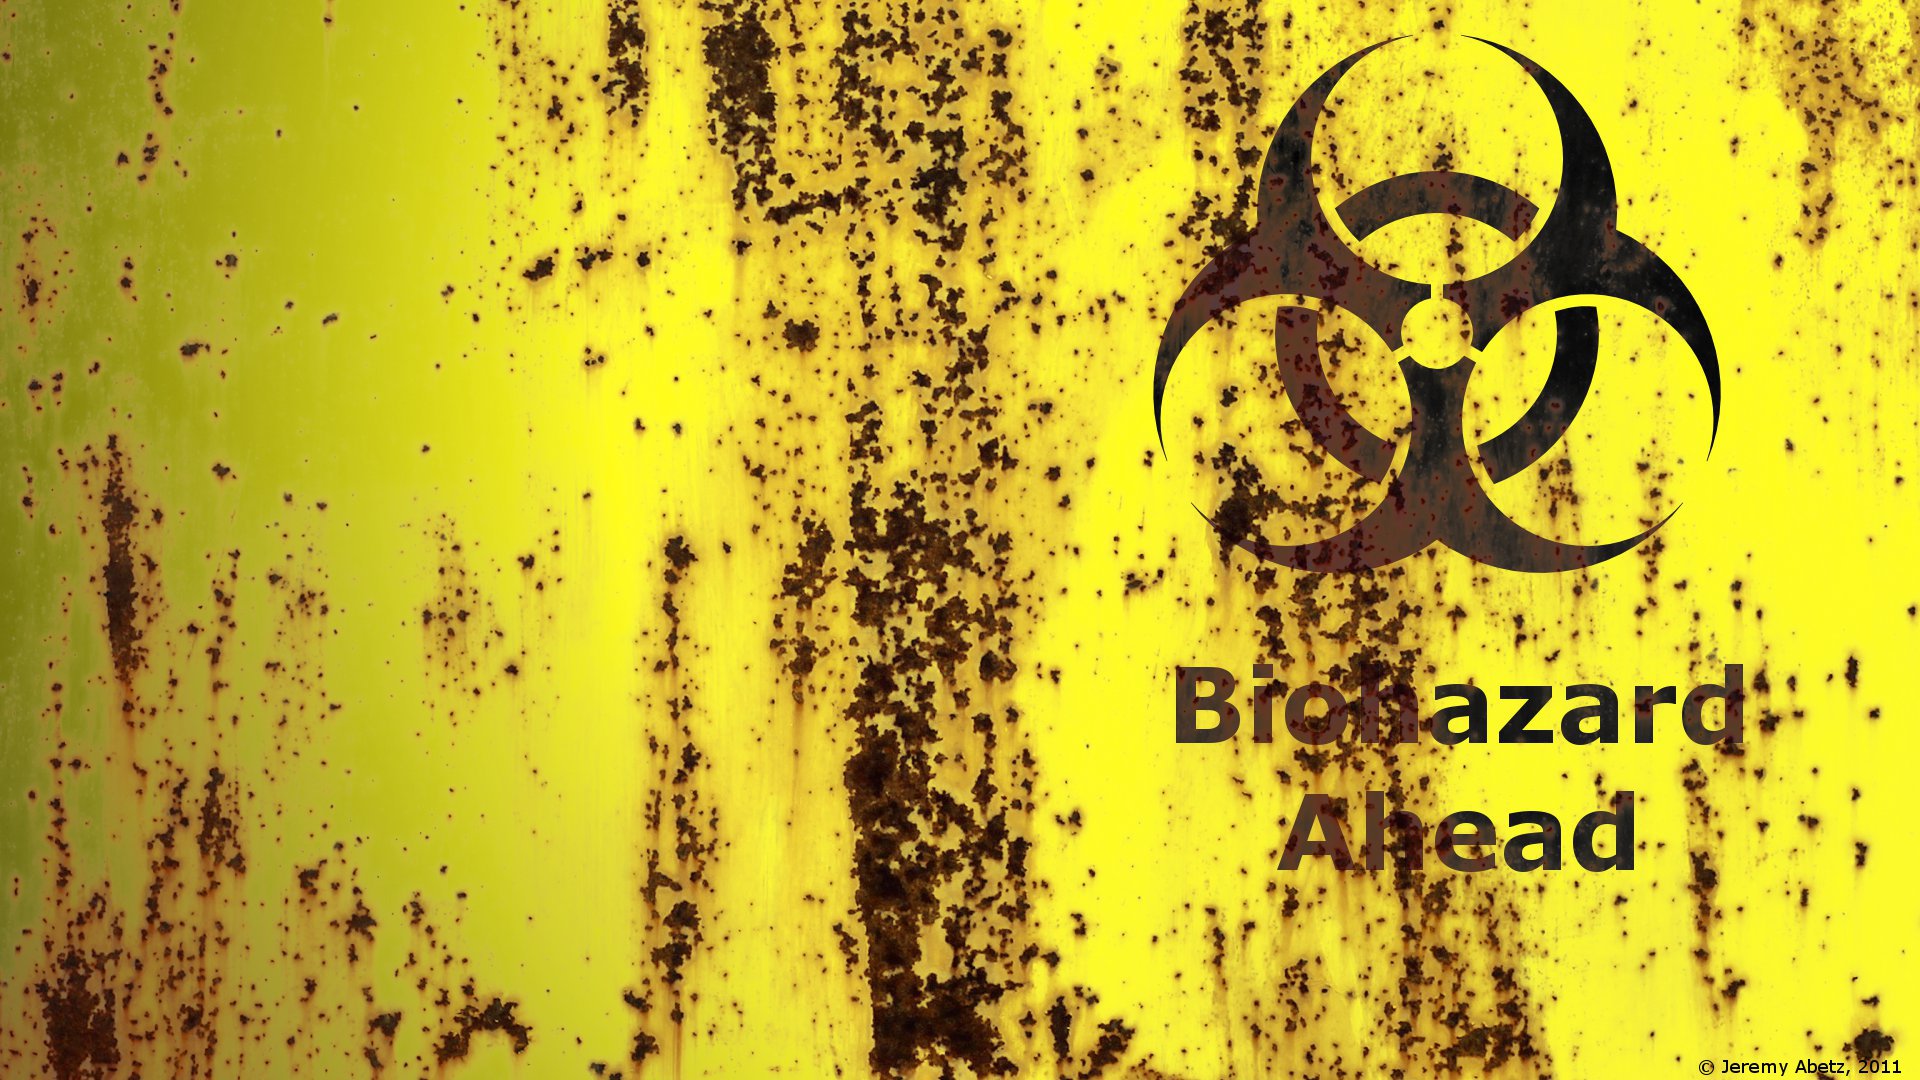 US Violating the Biological Weapons Convention, NGO Asserts1920 x 1080